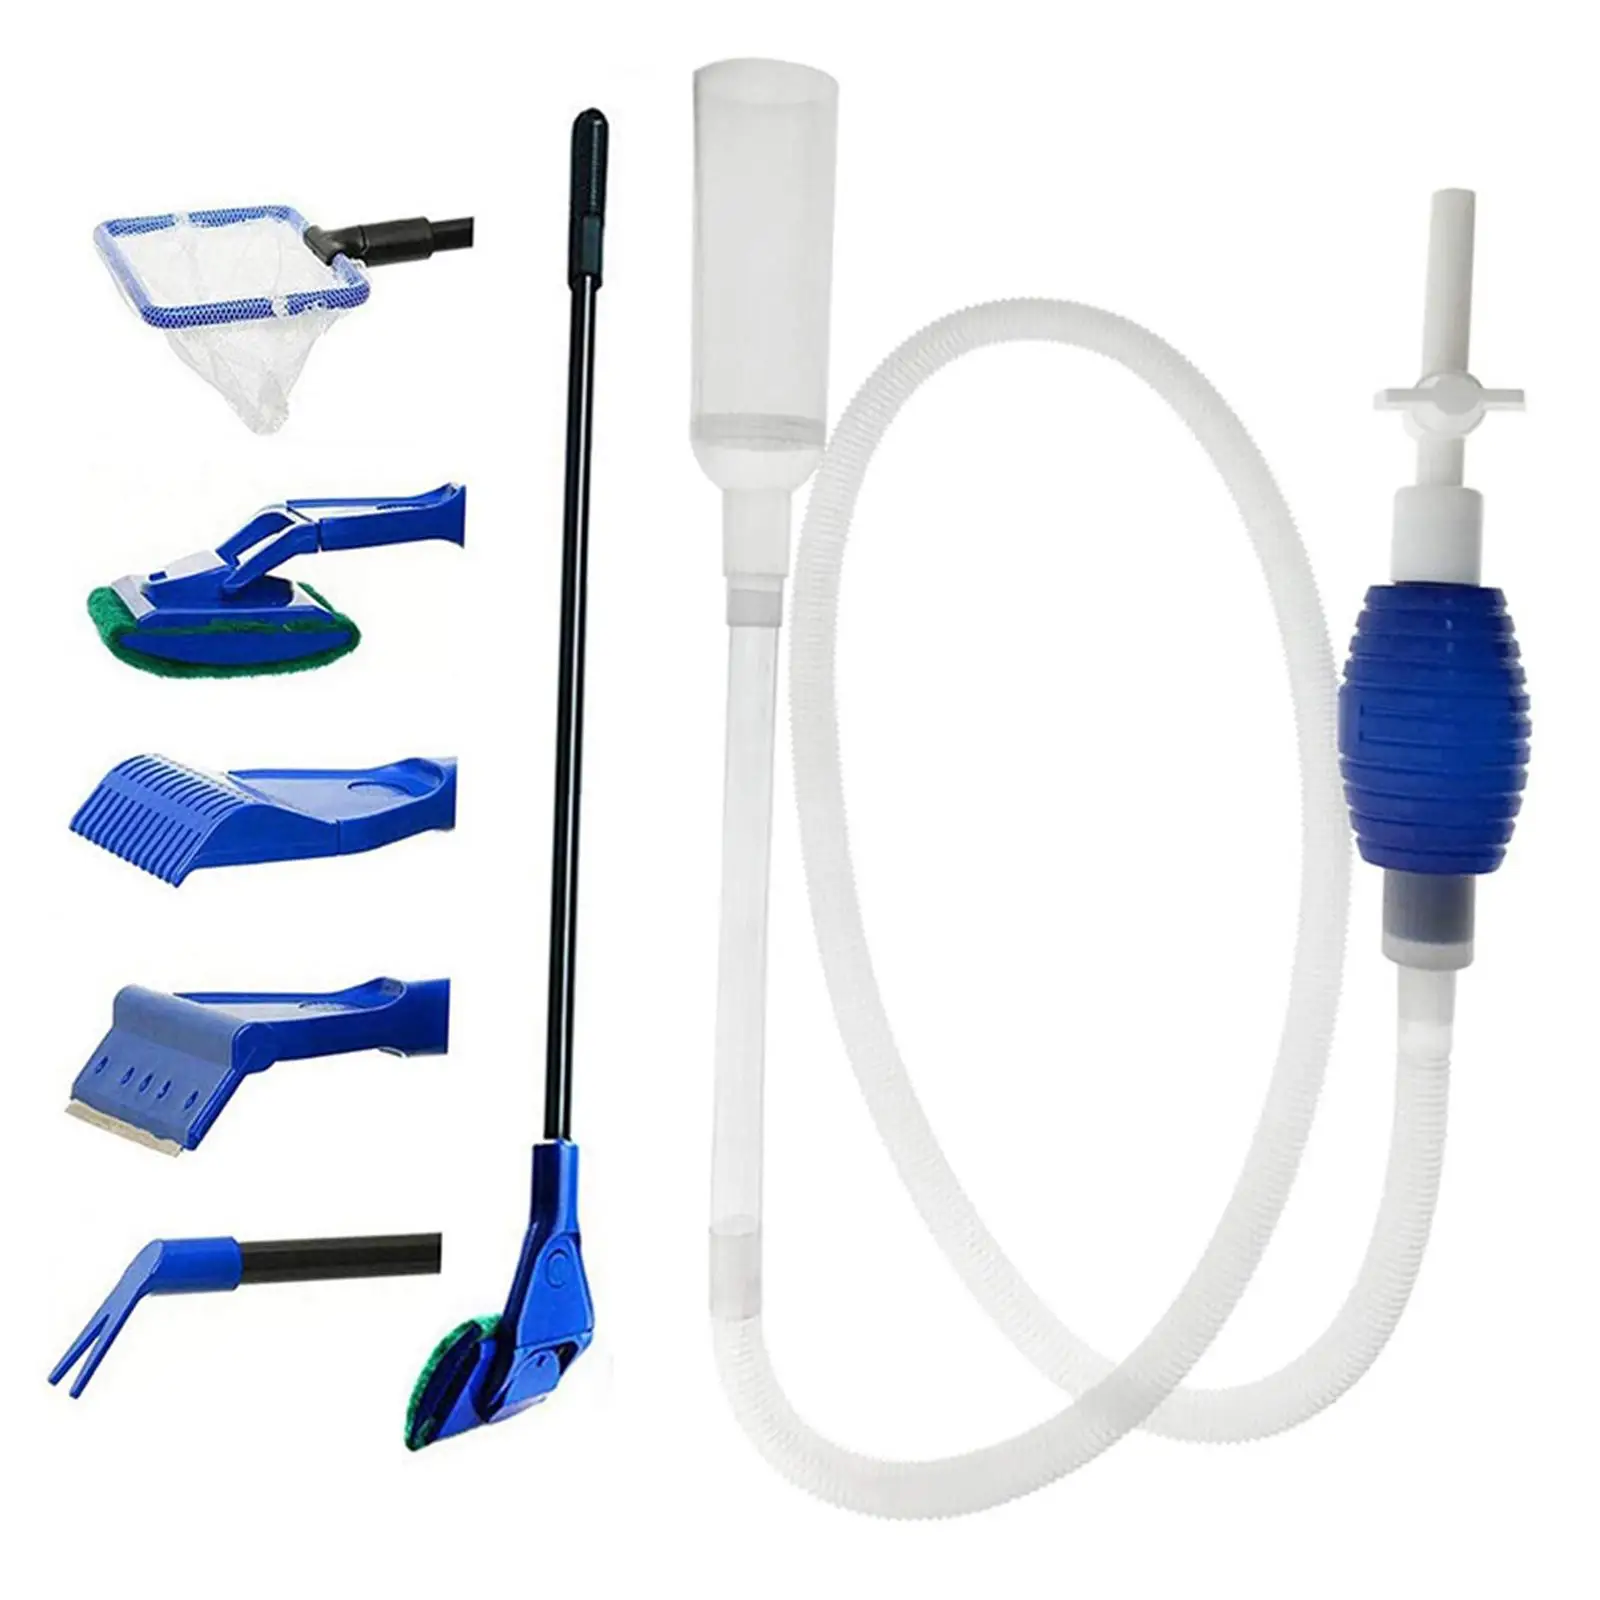 Five Aquarium Tank Cleaning Tool Kit & Aquarium Tank Gravel Cleaner with Siphon Vacuum for Water Cleaning/Changing Tool